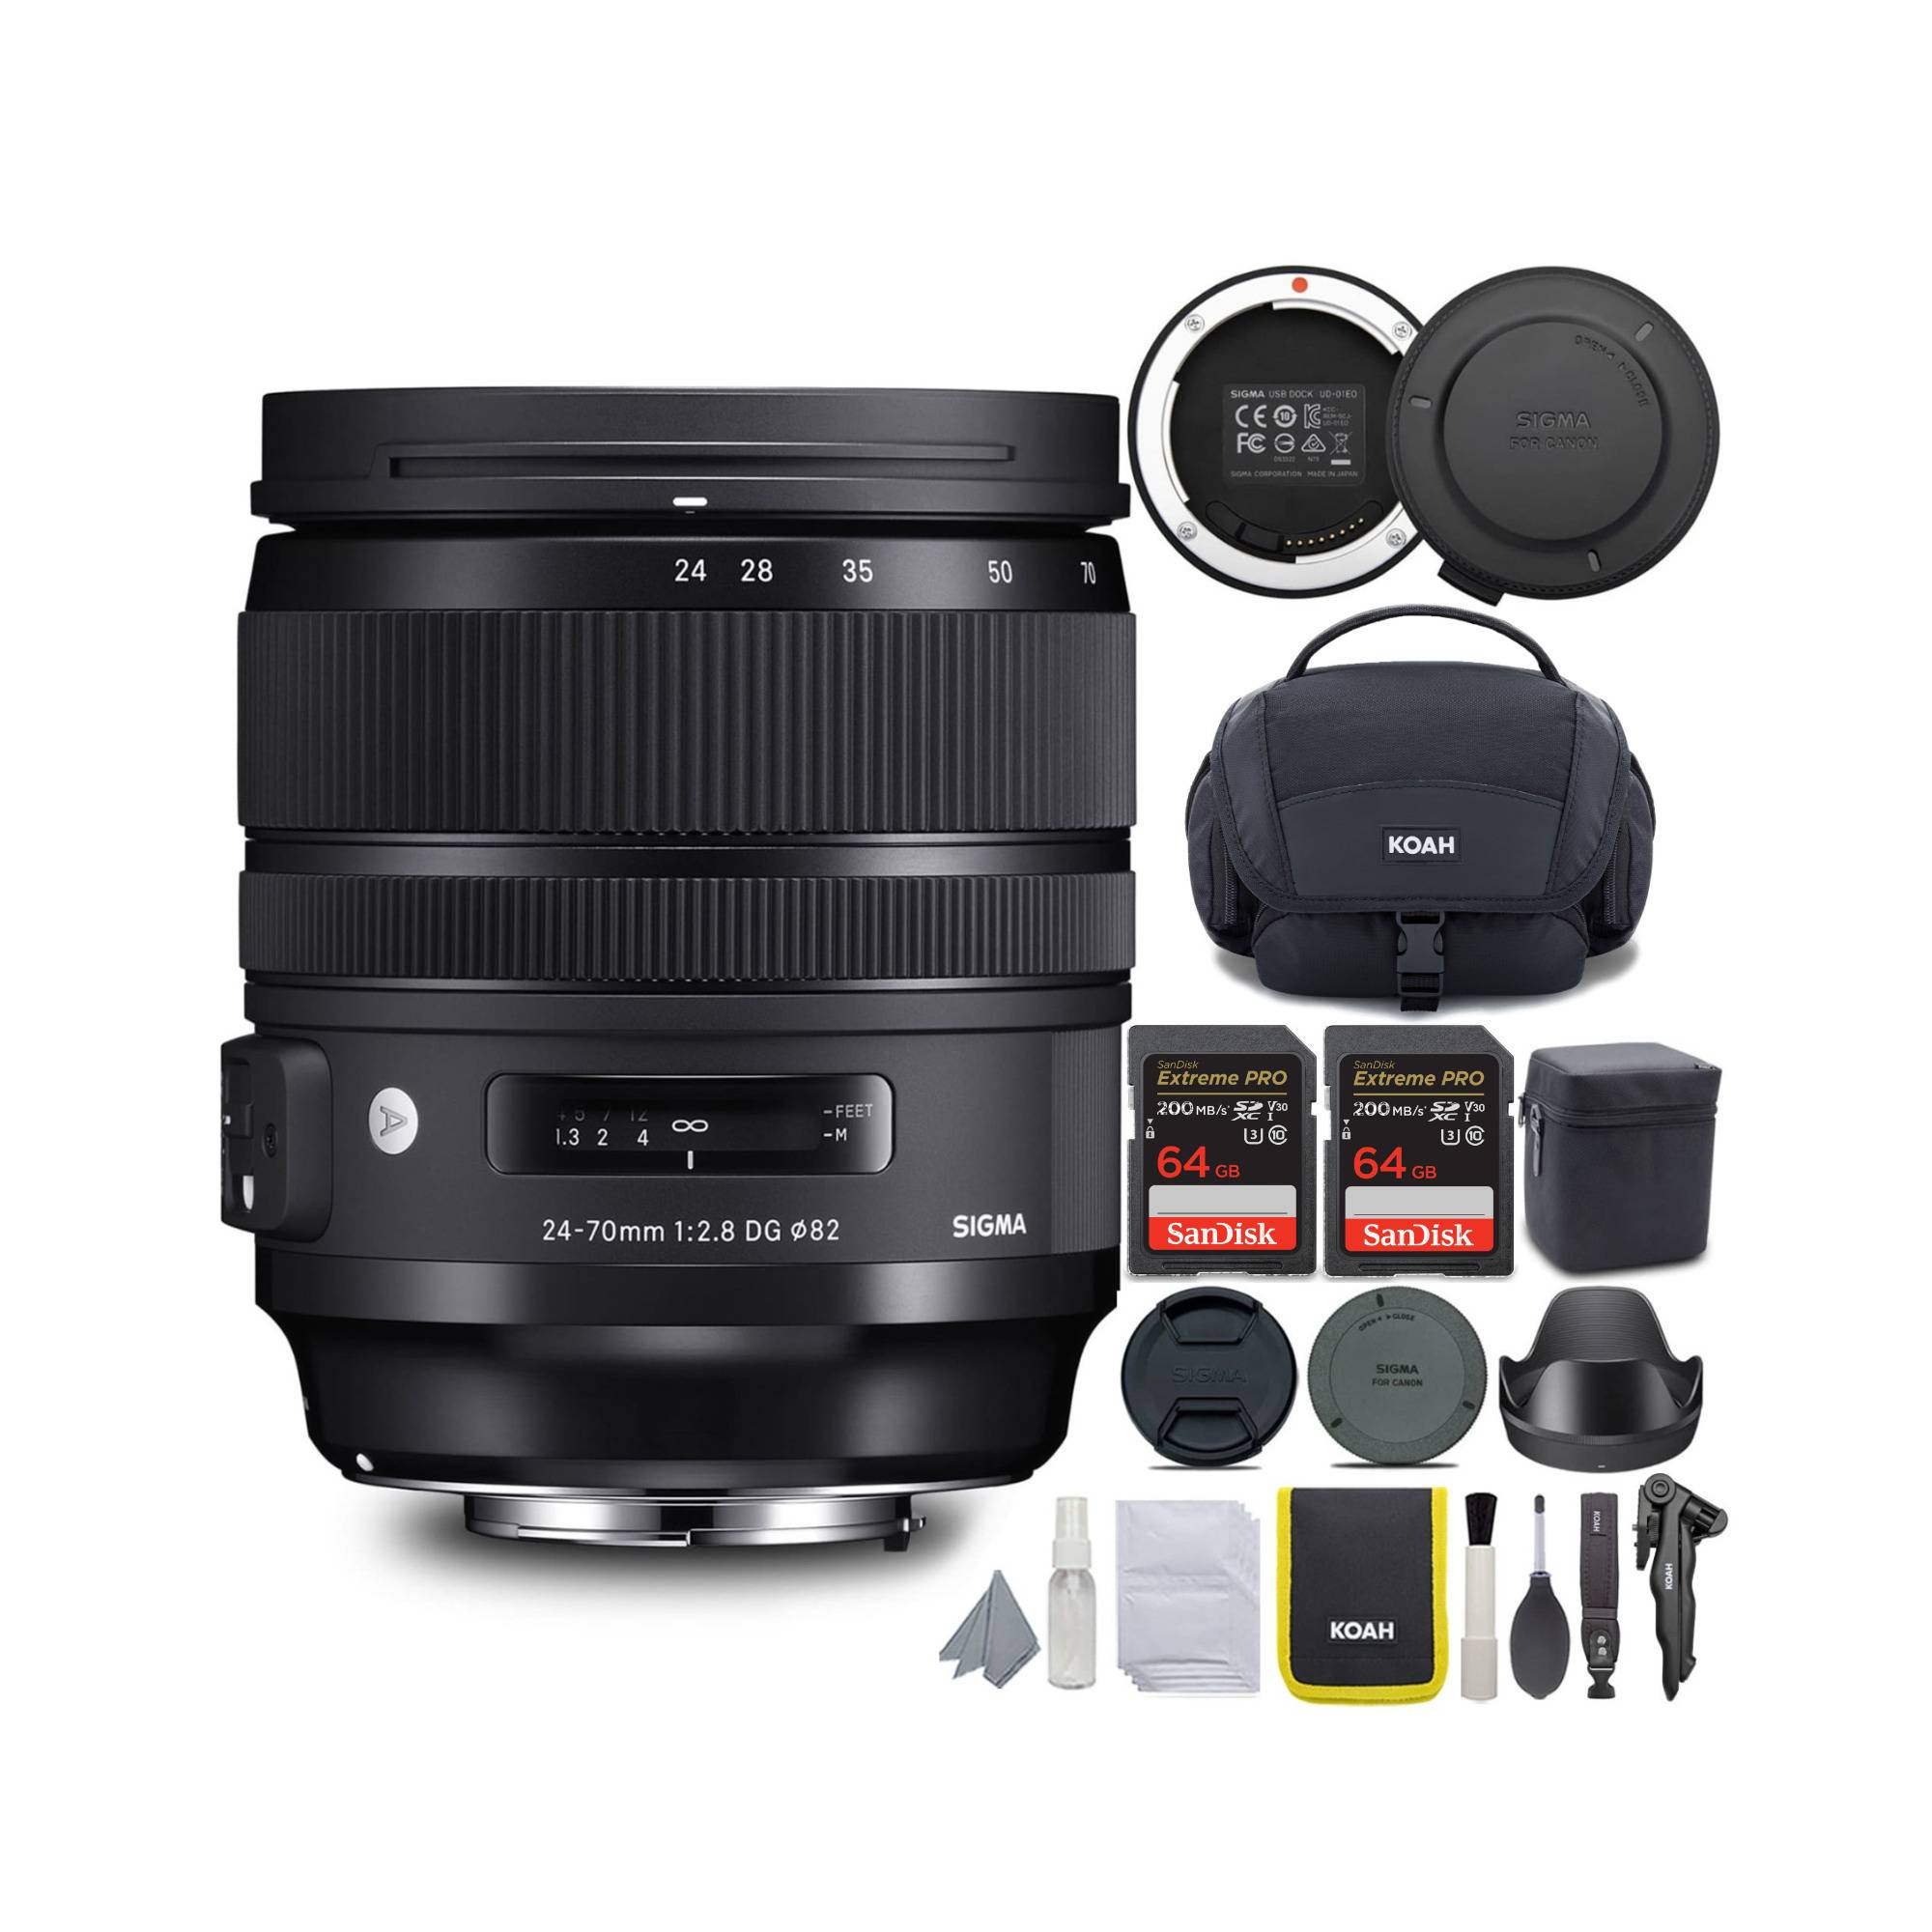 Sigma 24-70mm f/2.8 DG OS HSM ART Canon EF Lens with USB Dock, 64 SD Card and Camera Bag